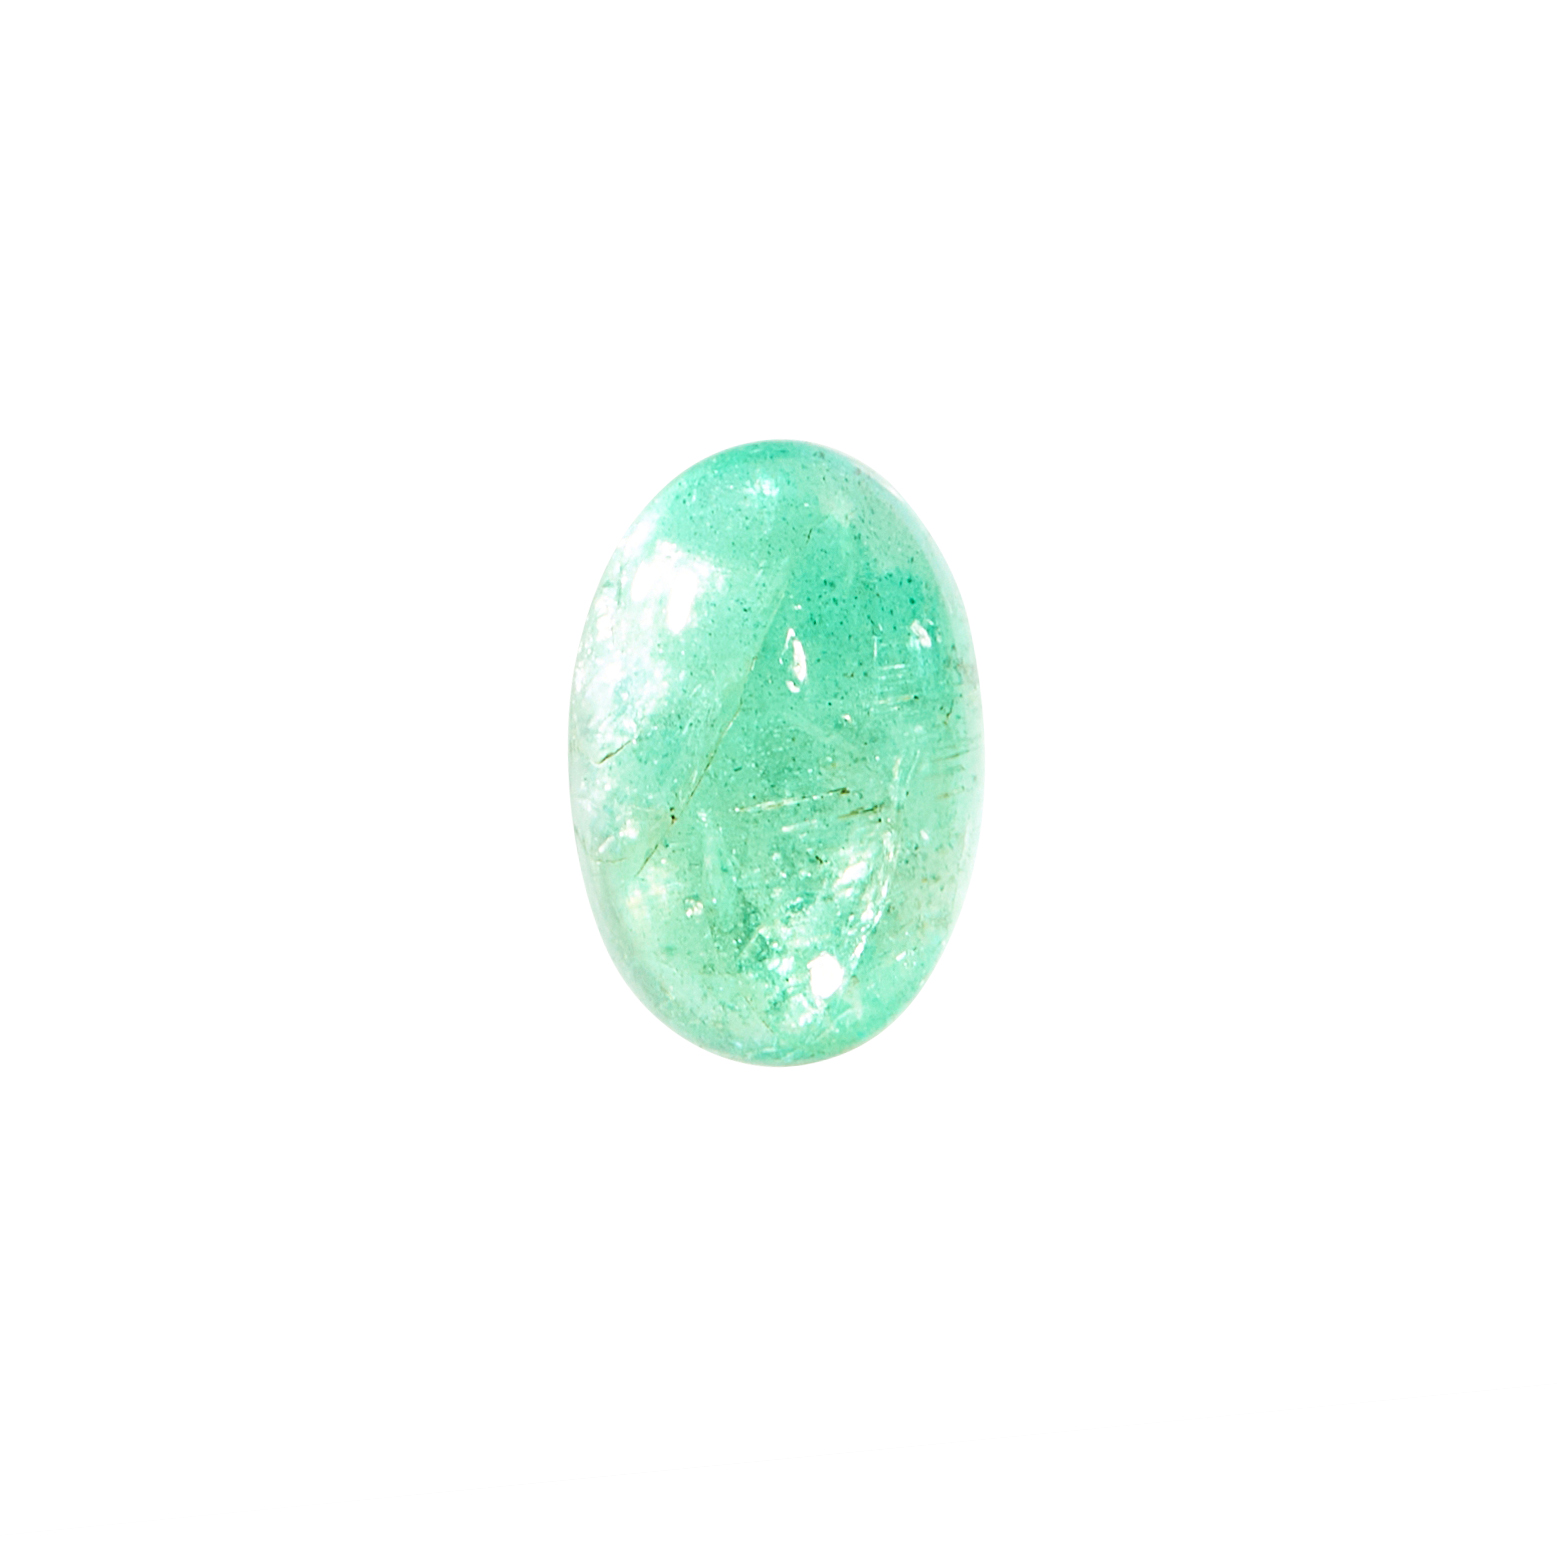 A 2.64 CARAT EMERALD oval cabochon cut, illustrated unmounted.